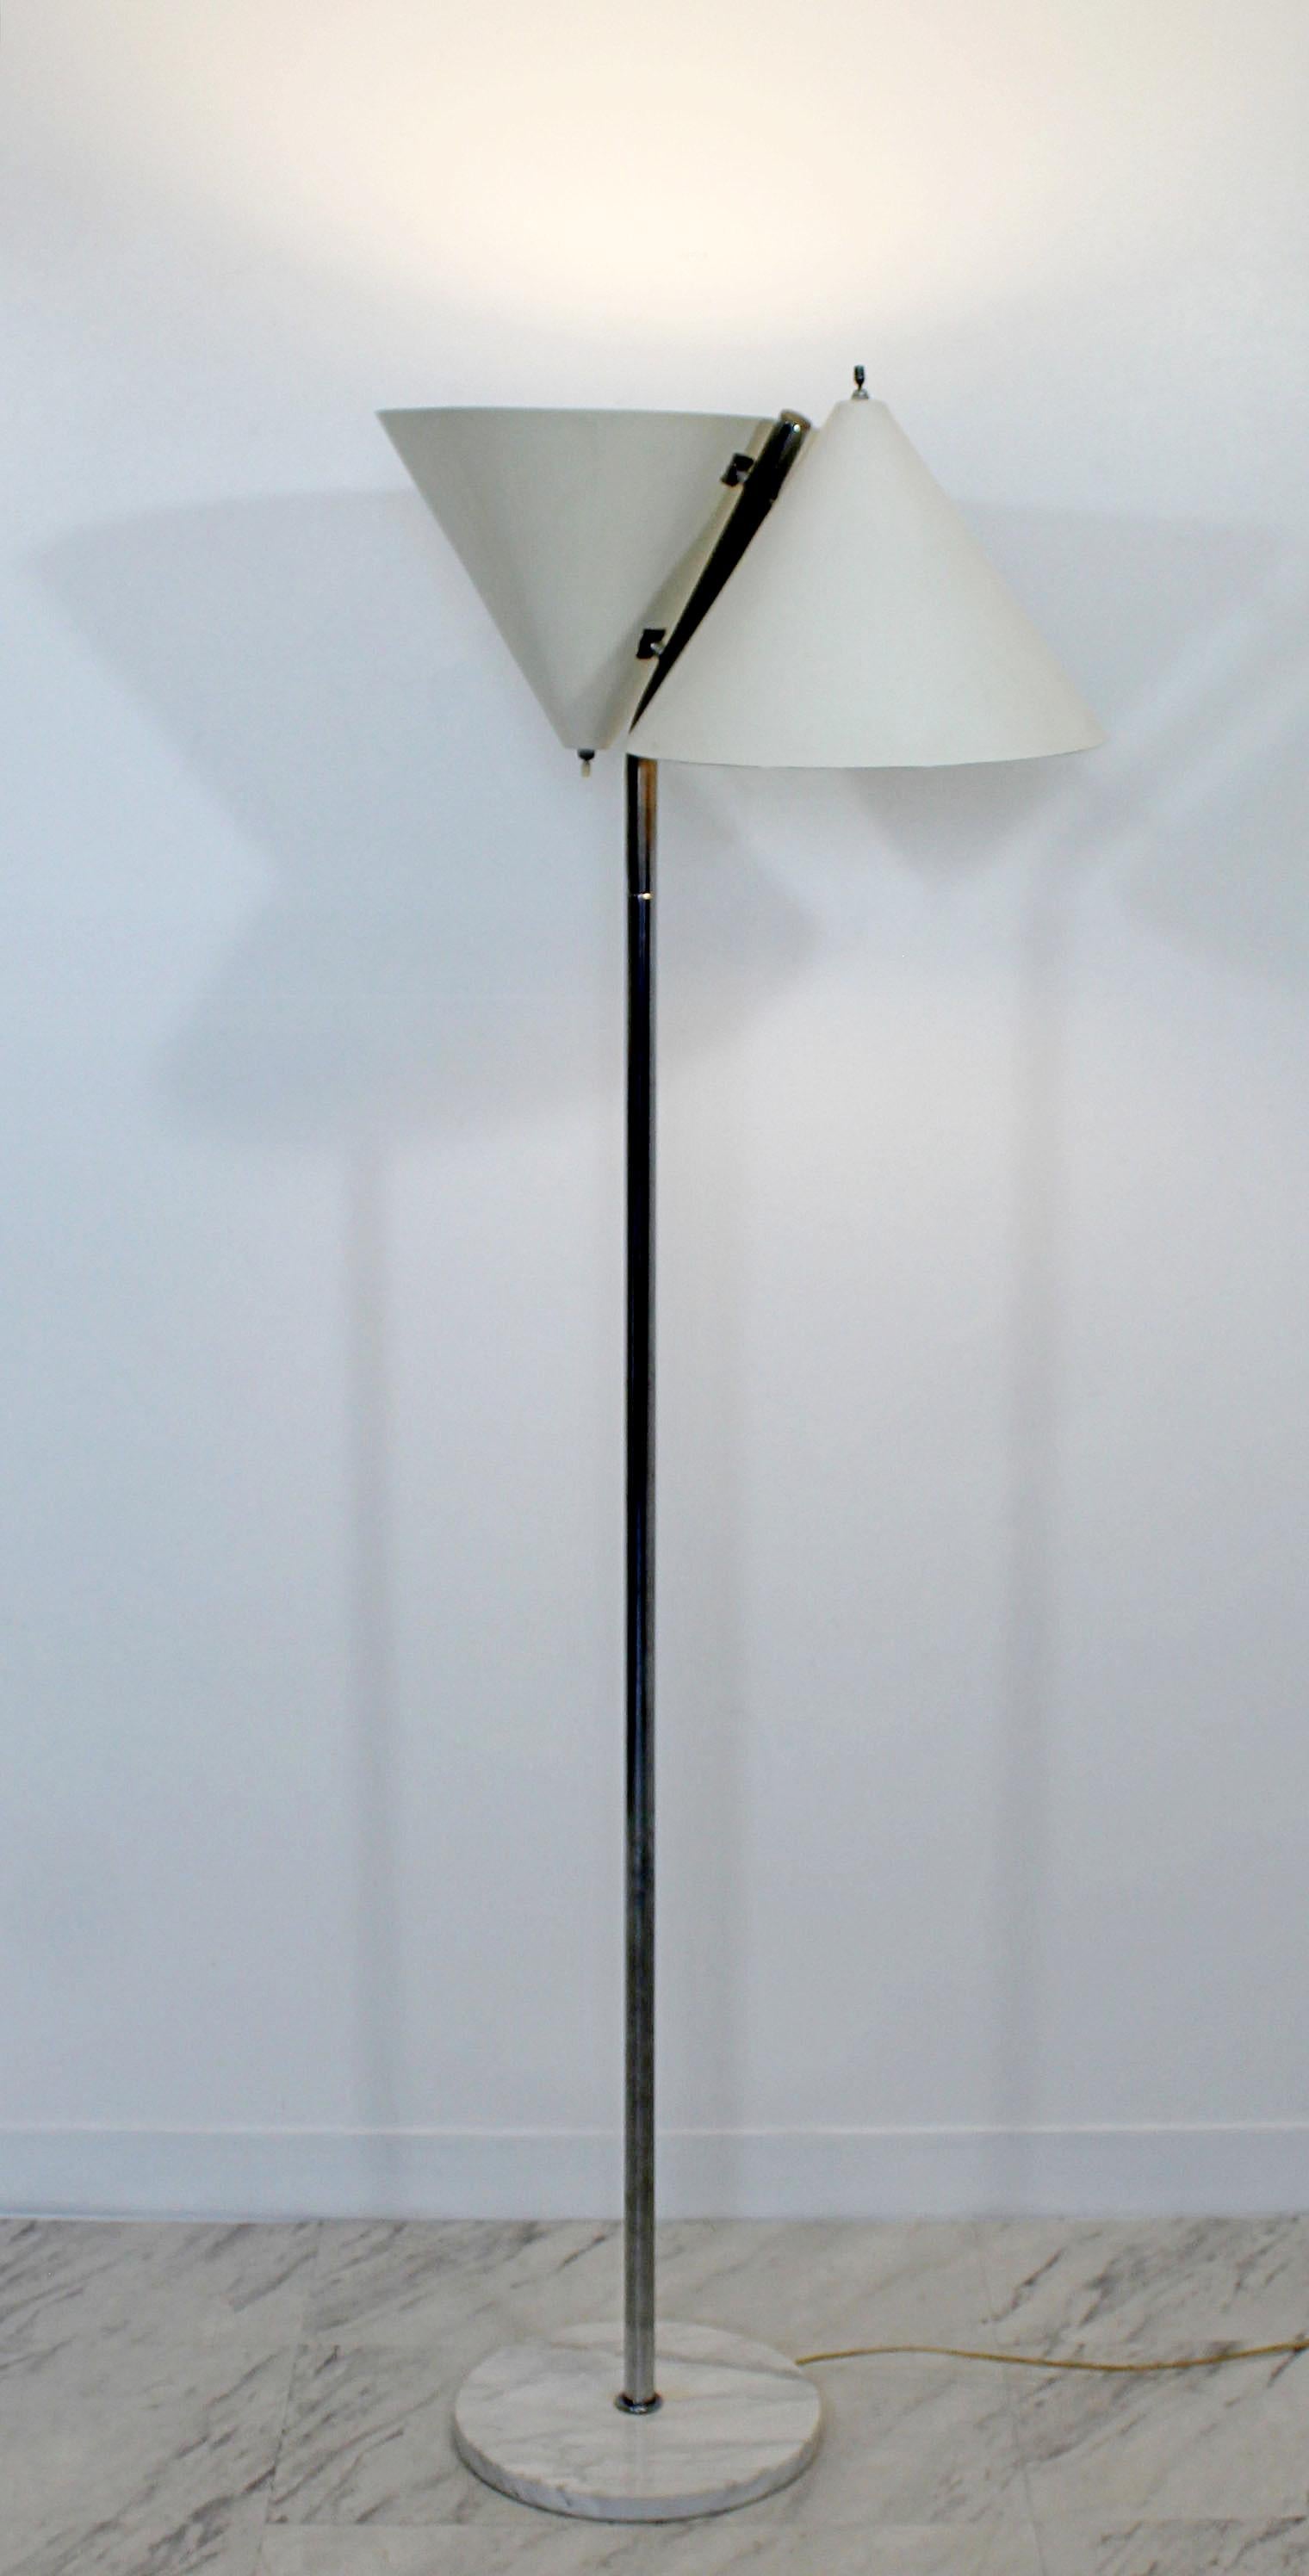 For your consideration is a wonderful, tall, Dual head floor lamp, on a white marble base, made in Italy, in the style of Arteluce, circa 1960s. In very good condition. The dimensions are 24